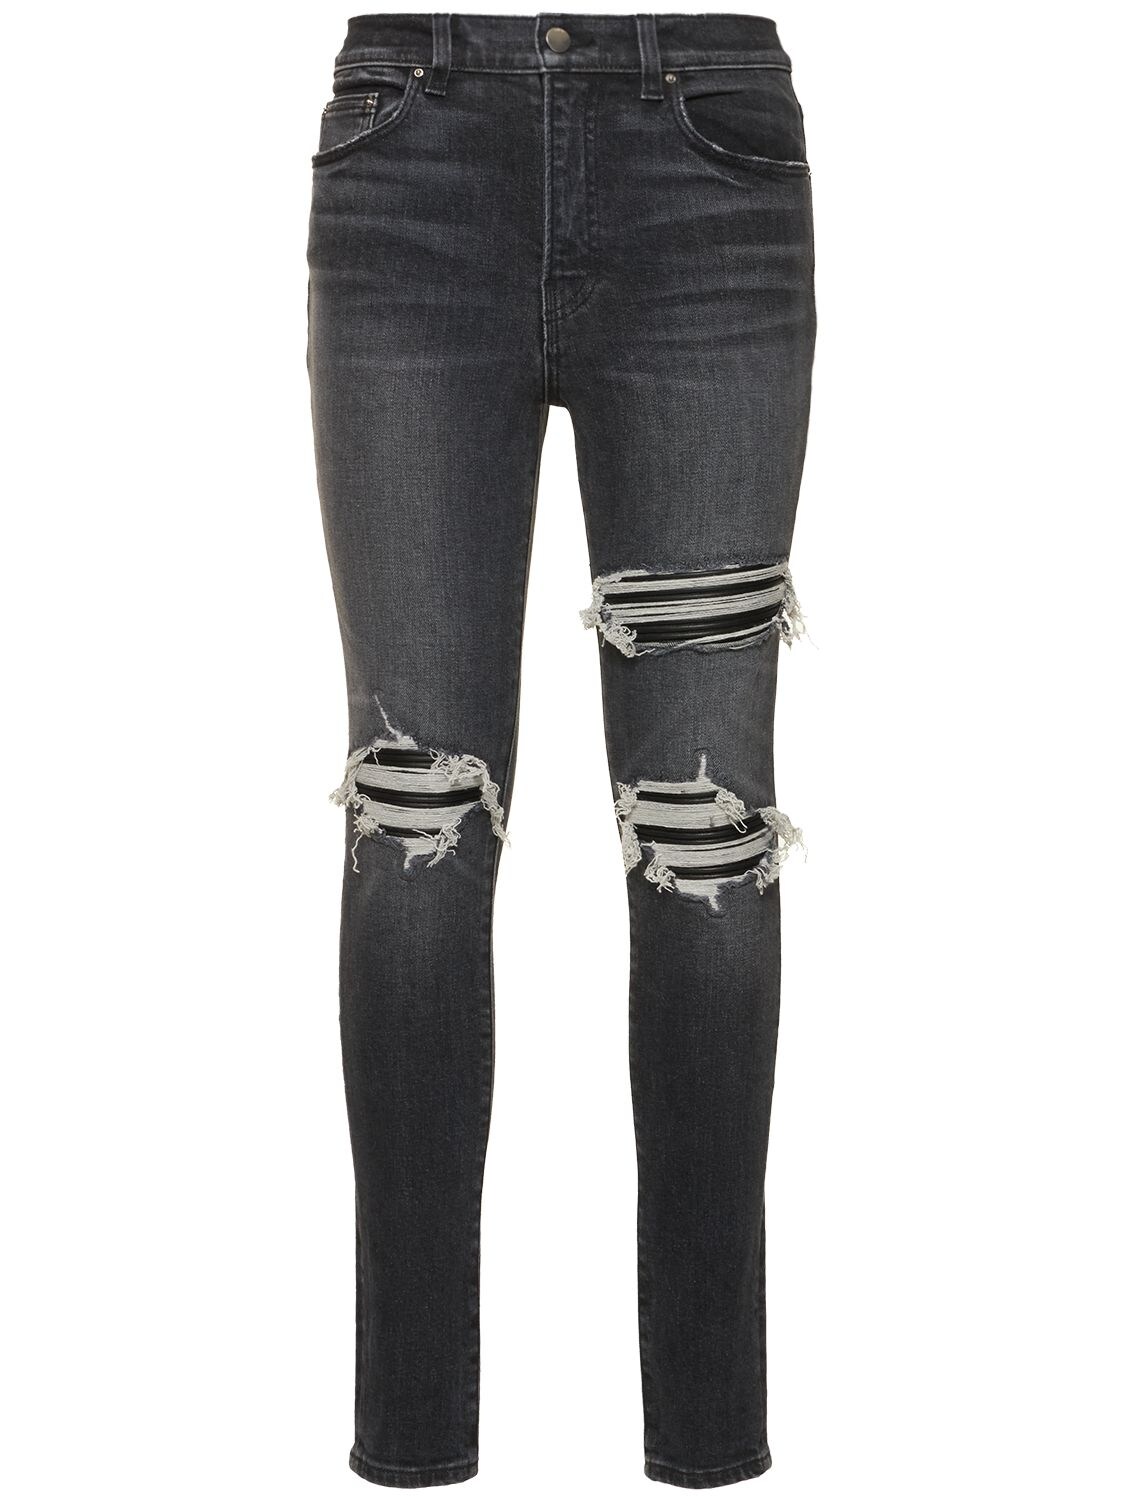 Faded Distressed High Waist Skinny Jeans